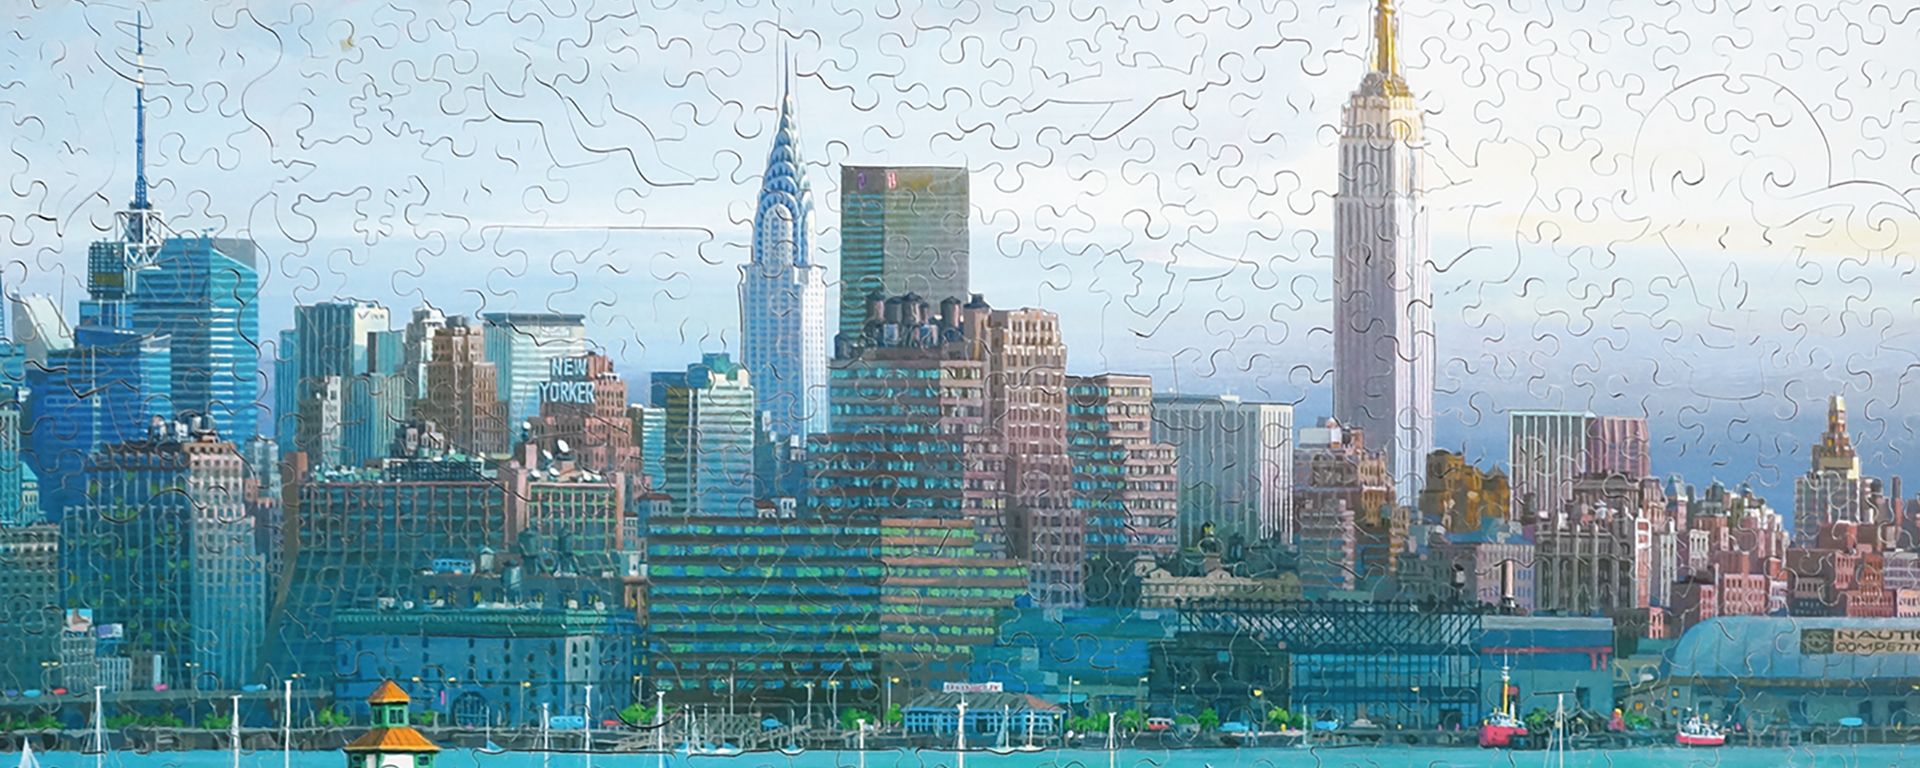 Wooden architecture jigsaw puzzle featuring a modern city skyline with water in the foreground.